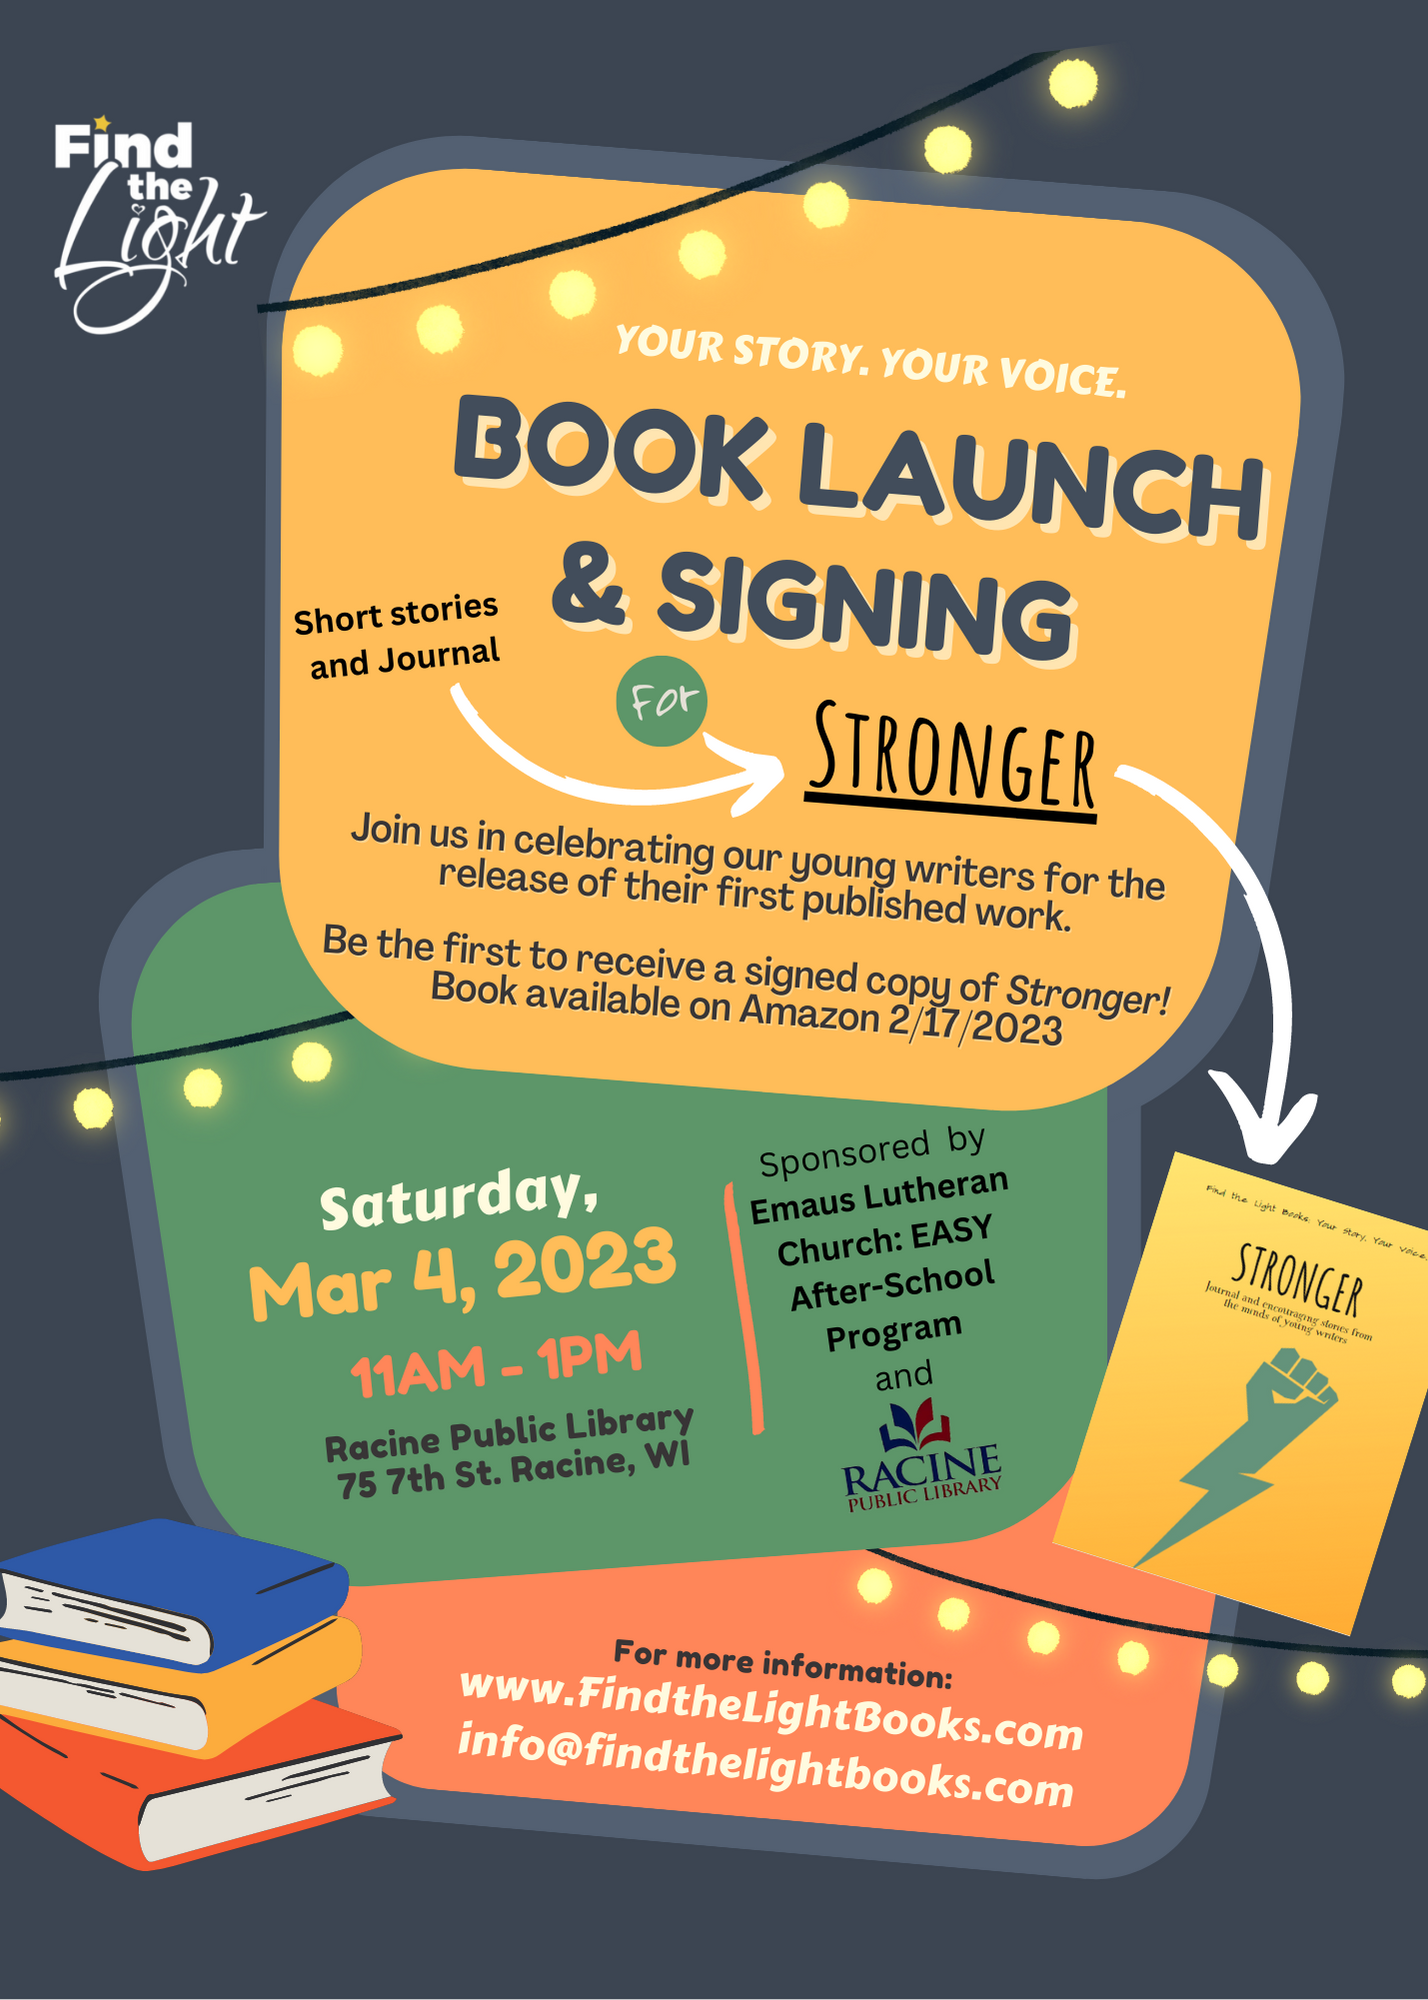 Your Story. Your Voice. Book launch & signing. Short stories and journal for Stronger. Join us in celebrating our young writers for the release of their first published work. Be the first to receive a signed copy of Stronger! Book available on Amazon 2/17/2023. Saturday, Mar 4, 2023. 11am-1pm. Racine Public Library, 75 7th Street, Racine, WI. Sponsored by Emaus Lutheran Church: EASY After-School Program and Racine Public Library. For more information: FindTheLightBooks.com or info@FindTheLightBooks.com.